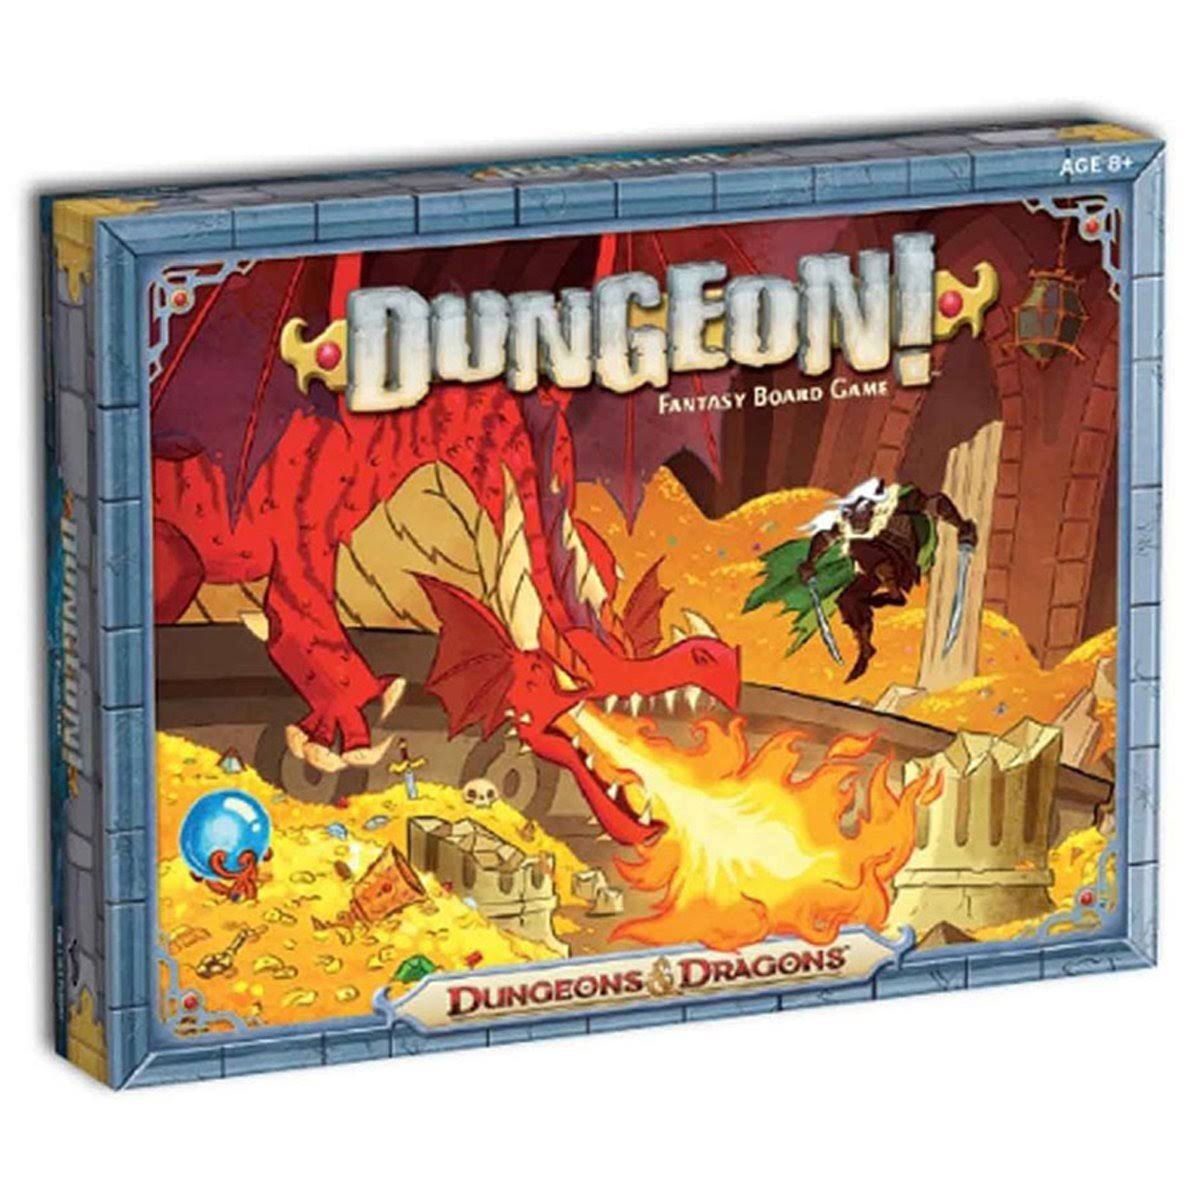 Dungeons and Dragons Fantasy Board Game